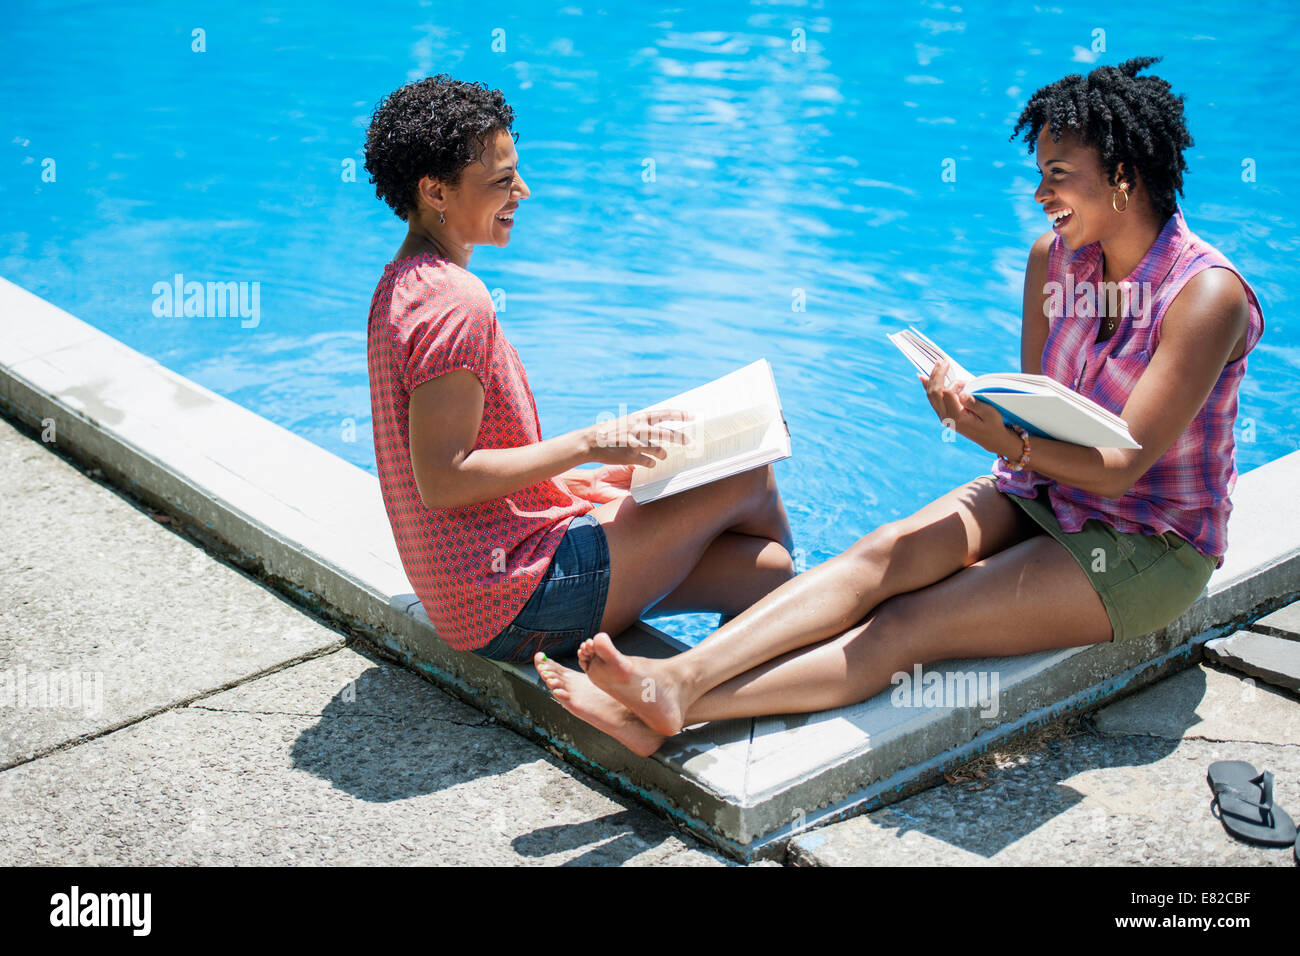 Two women sitting by the side of a swimming pool, reading books. Stock Photo